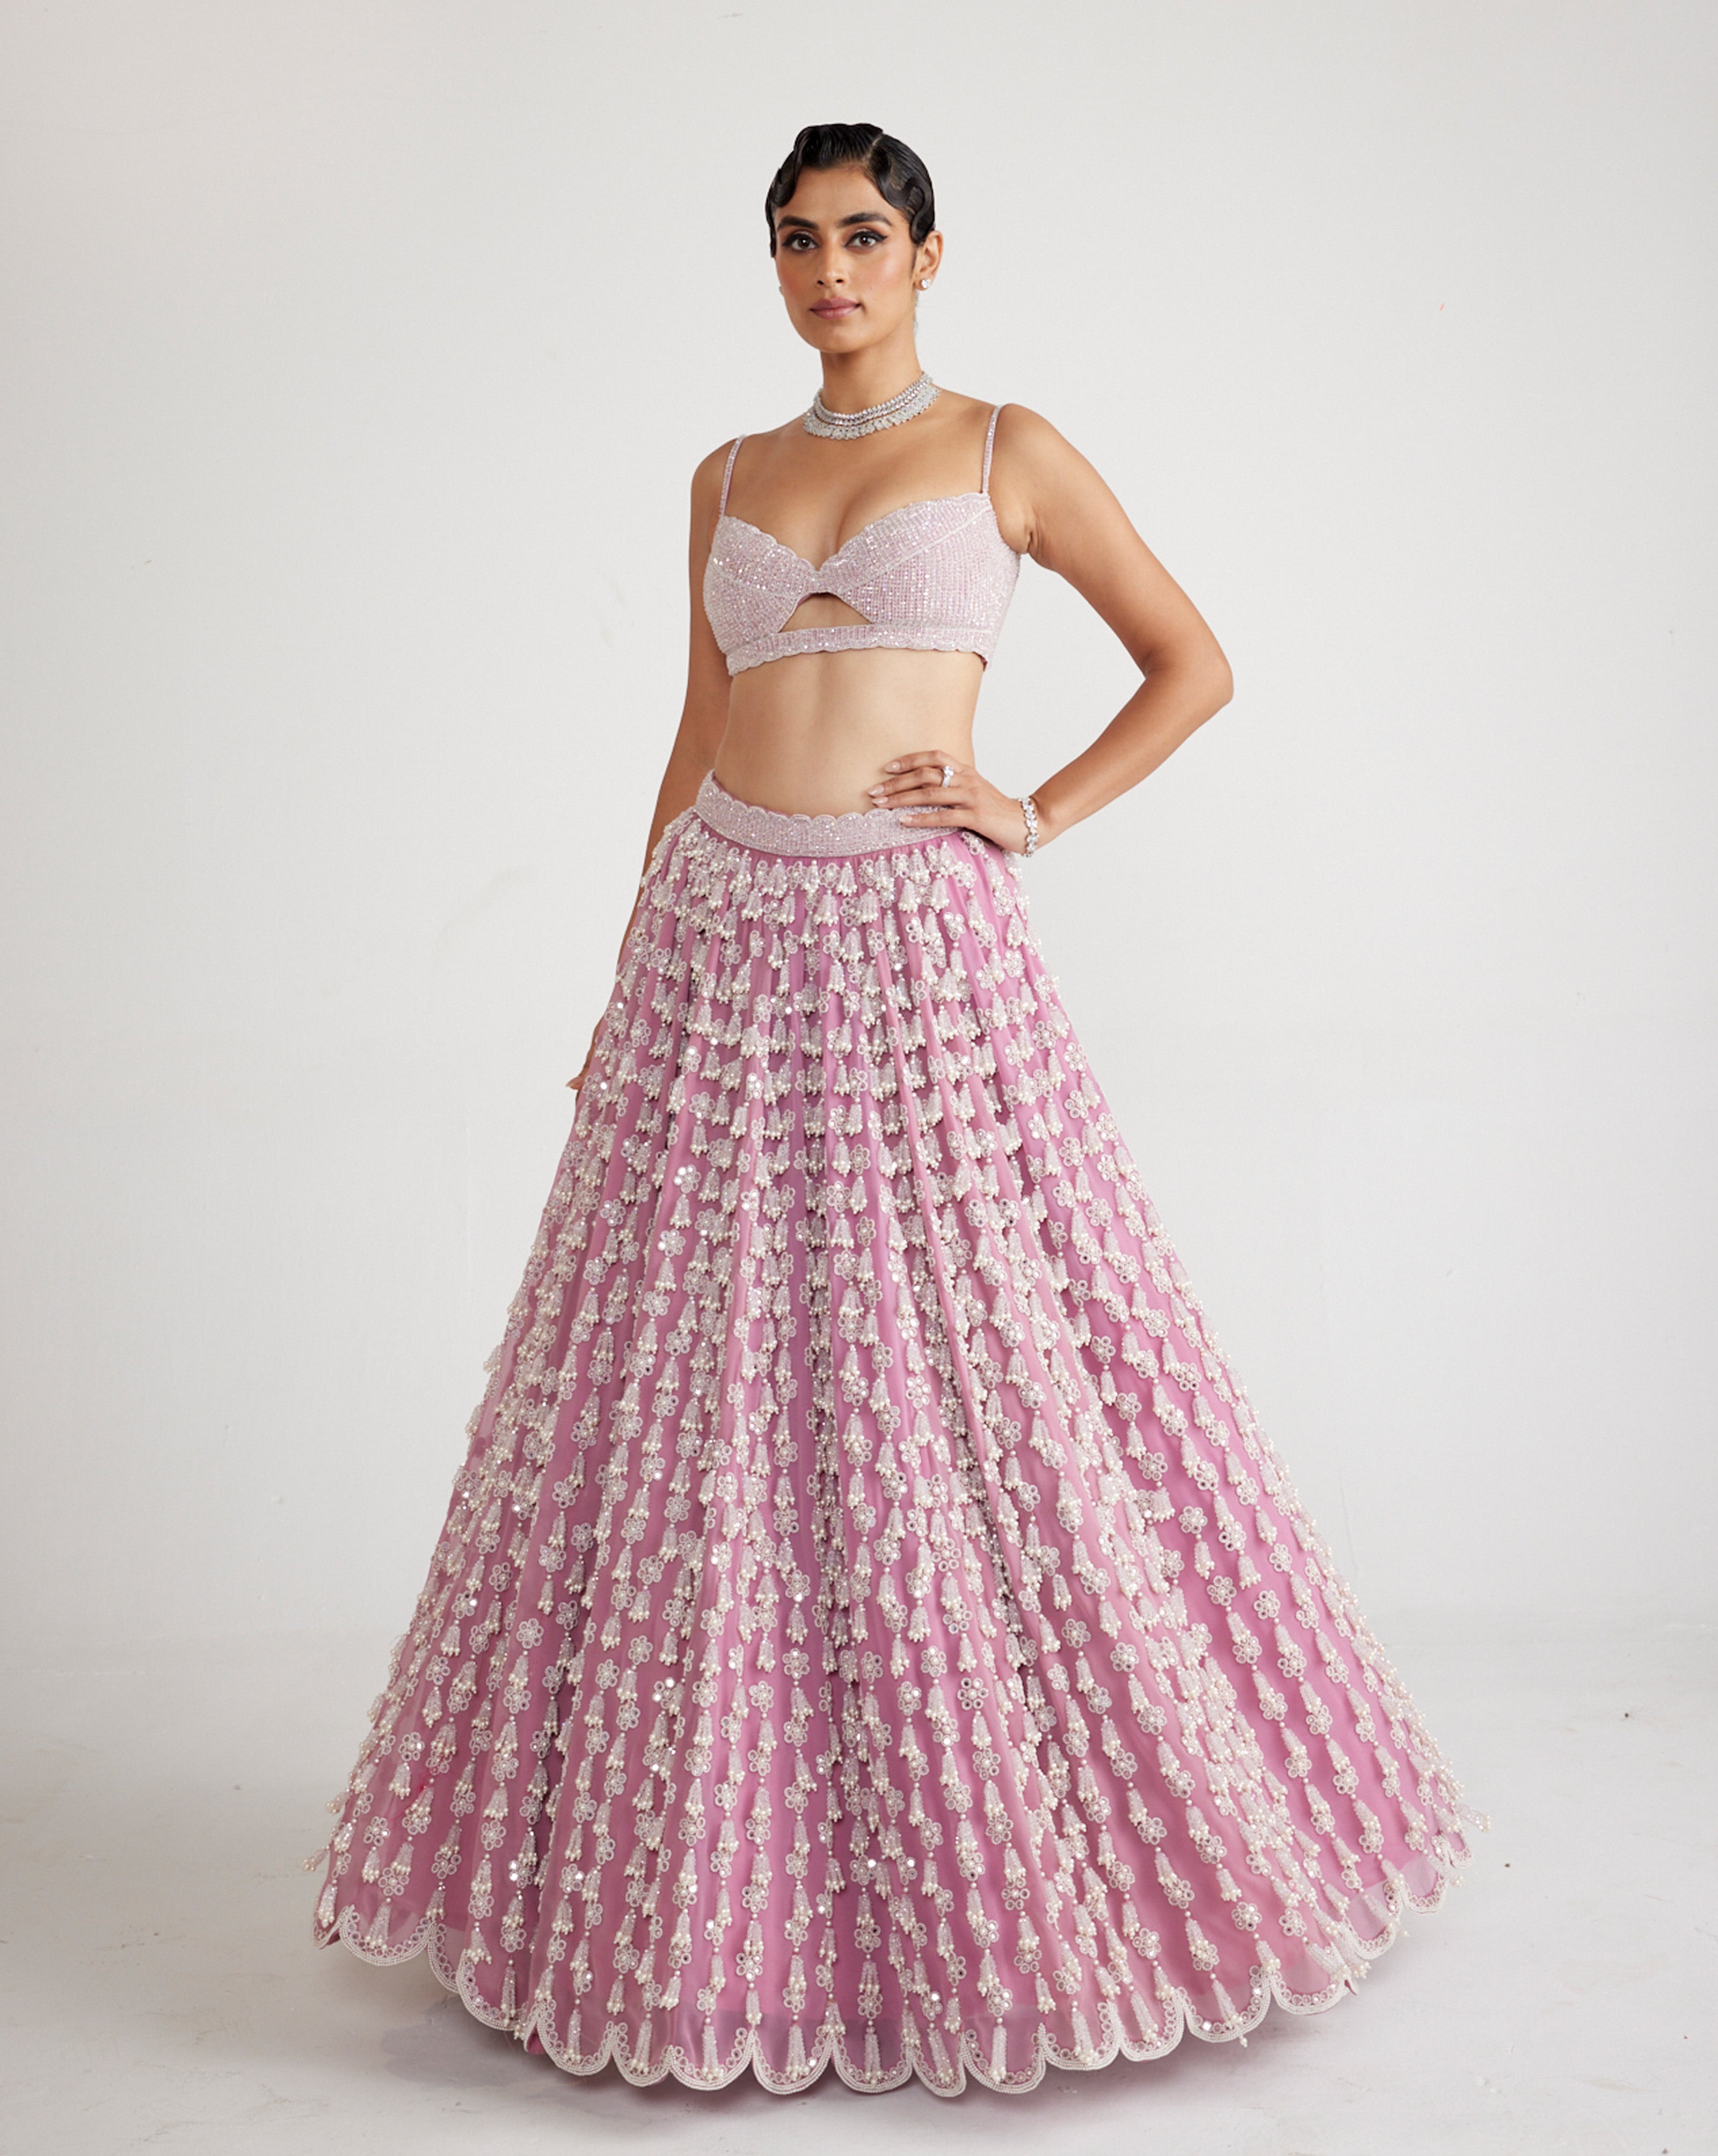 Digital Print Stitched Lehenga Skirt Price in India, Full Specifications &  Offers | DTashion.com